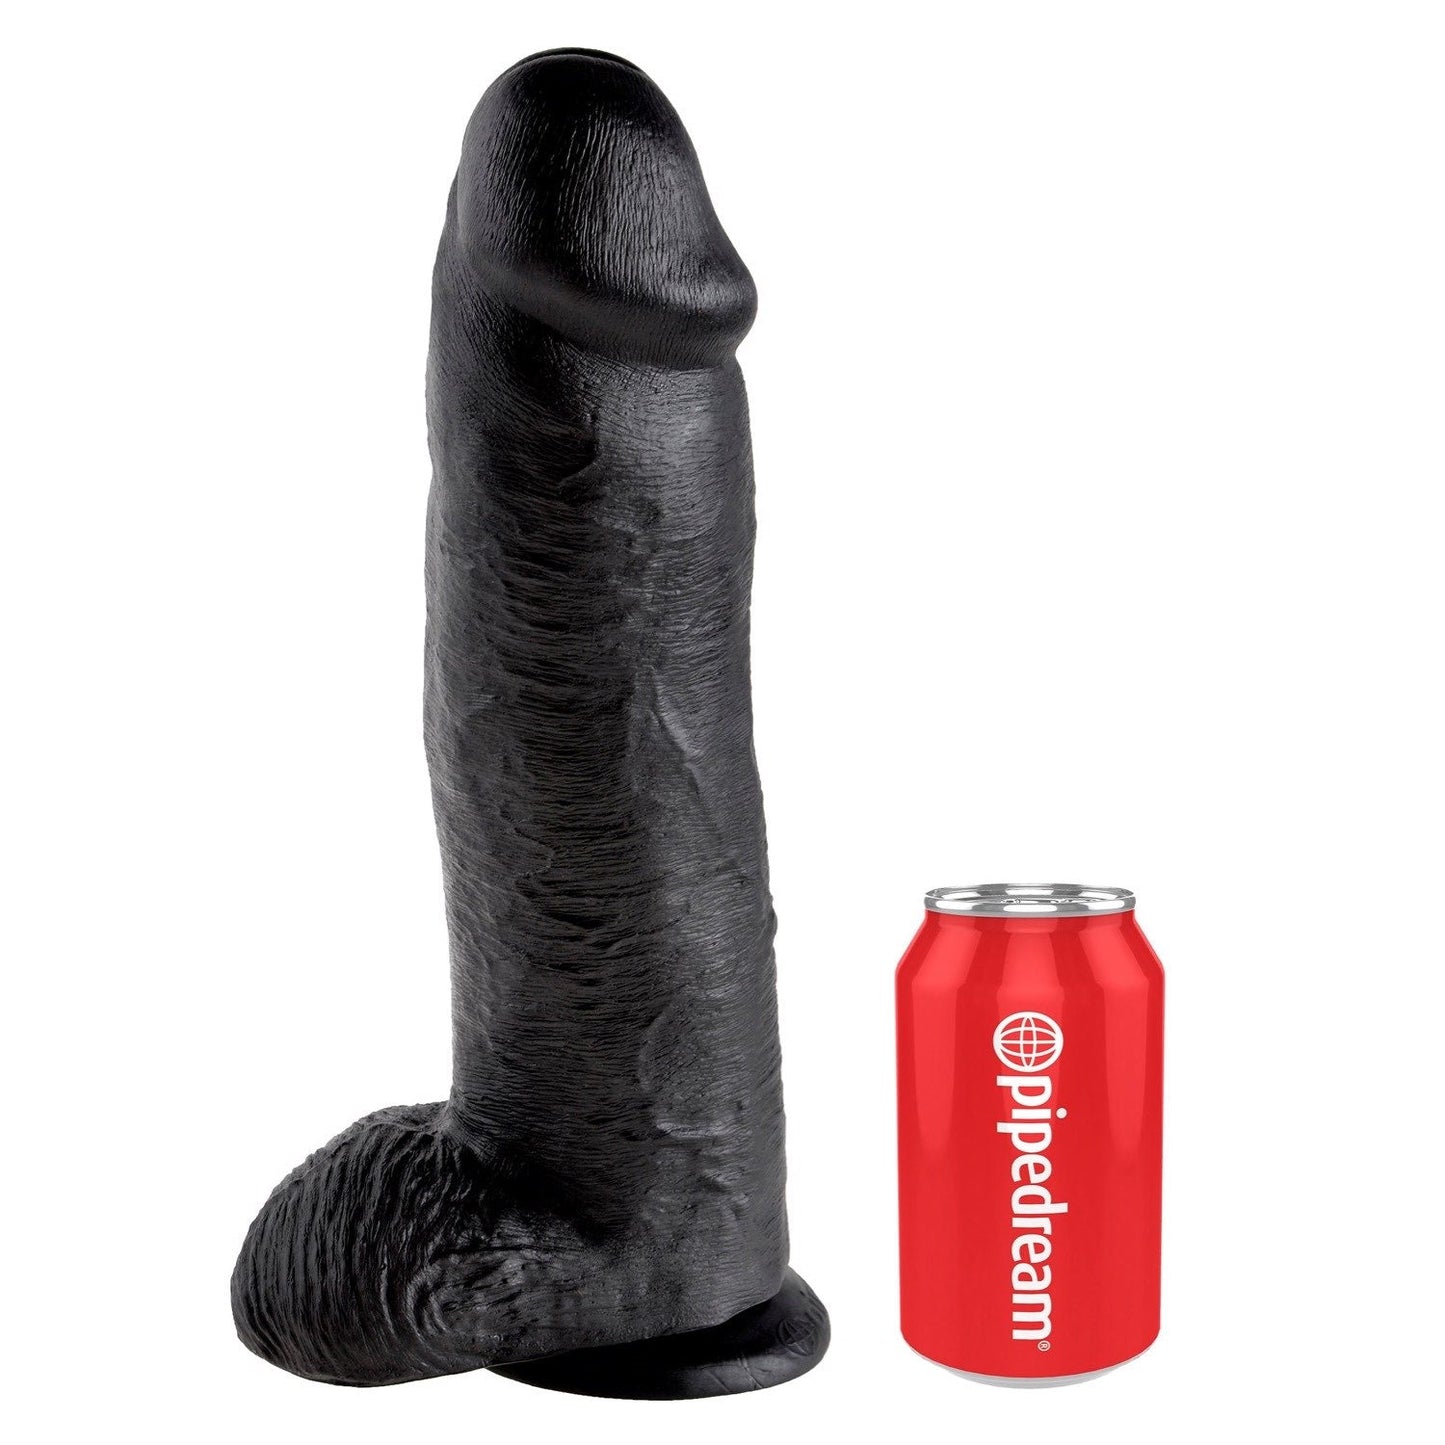 12" Cock With Balls - Black 30.5 cm (12") Dong